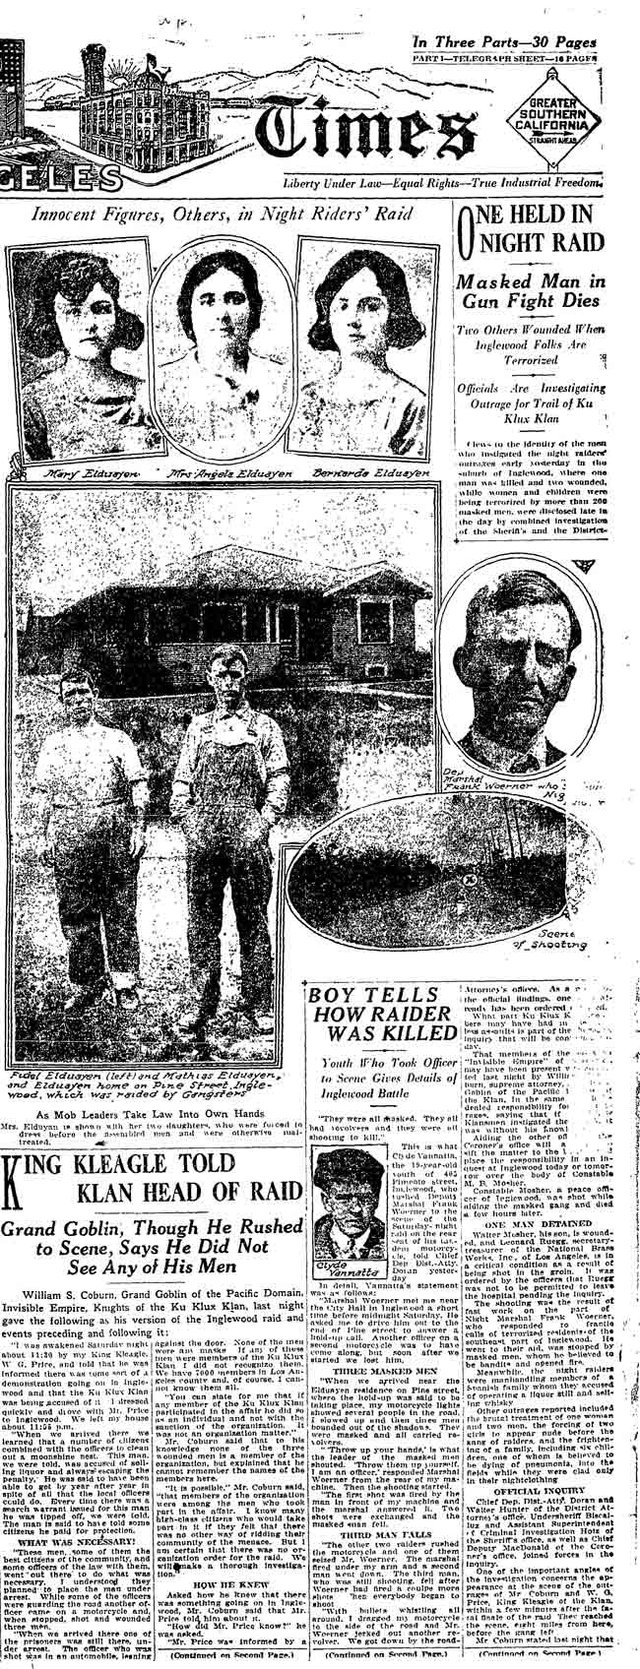 Partial front page of the Los Angeles Times for Monday, April 24, 1922, displaying coverage of a Ku Klux Klan raid in an L.A. suburb